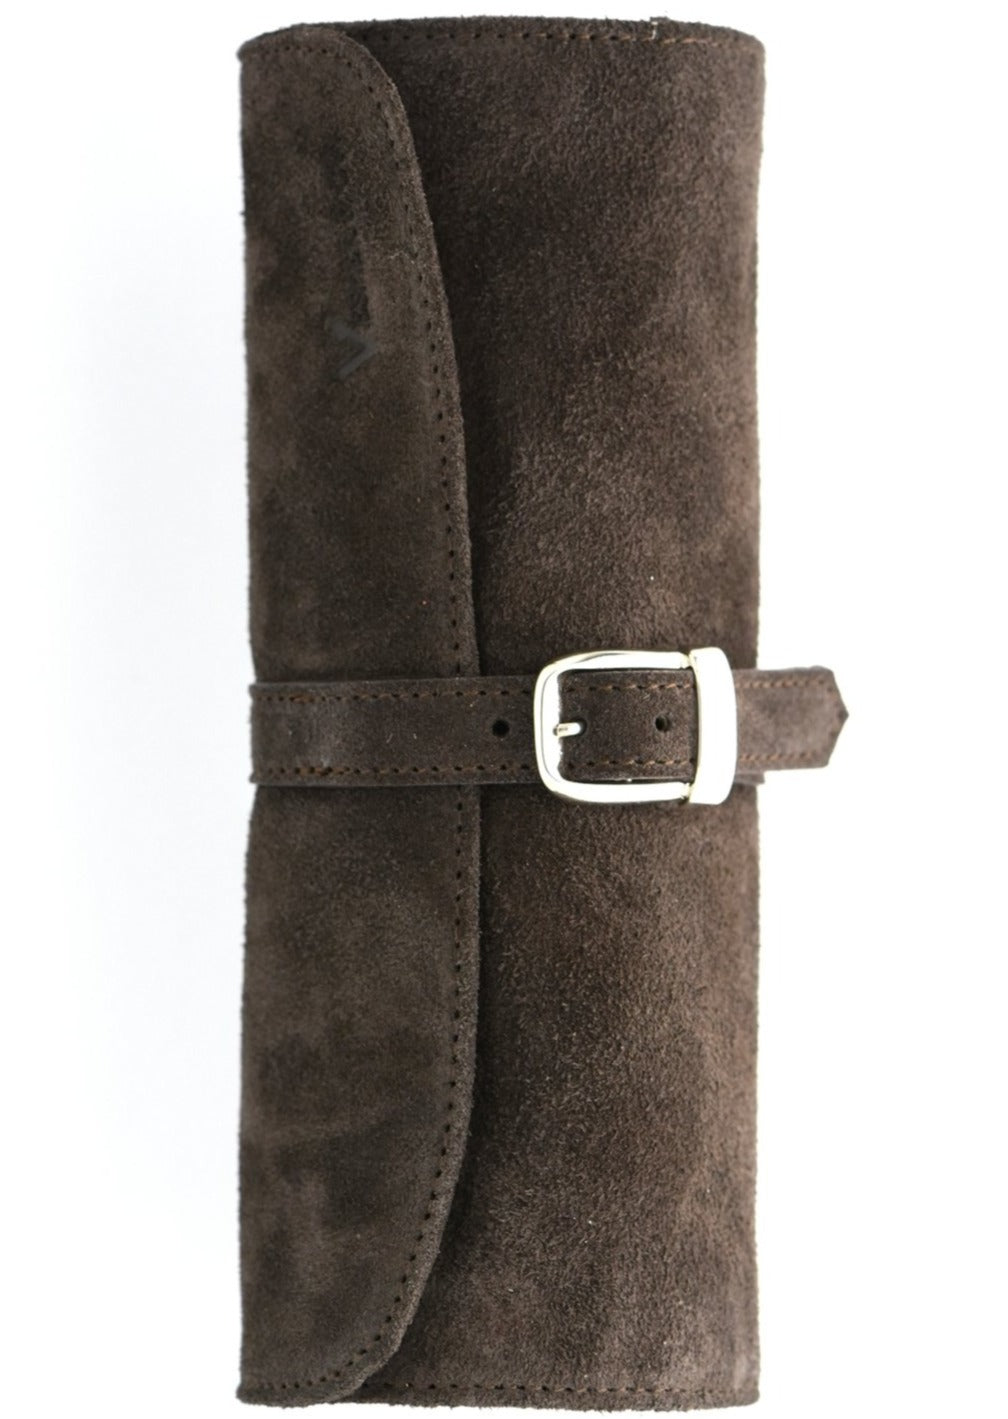 Suede Leather Watch Travel Tube in Seal Brown